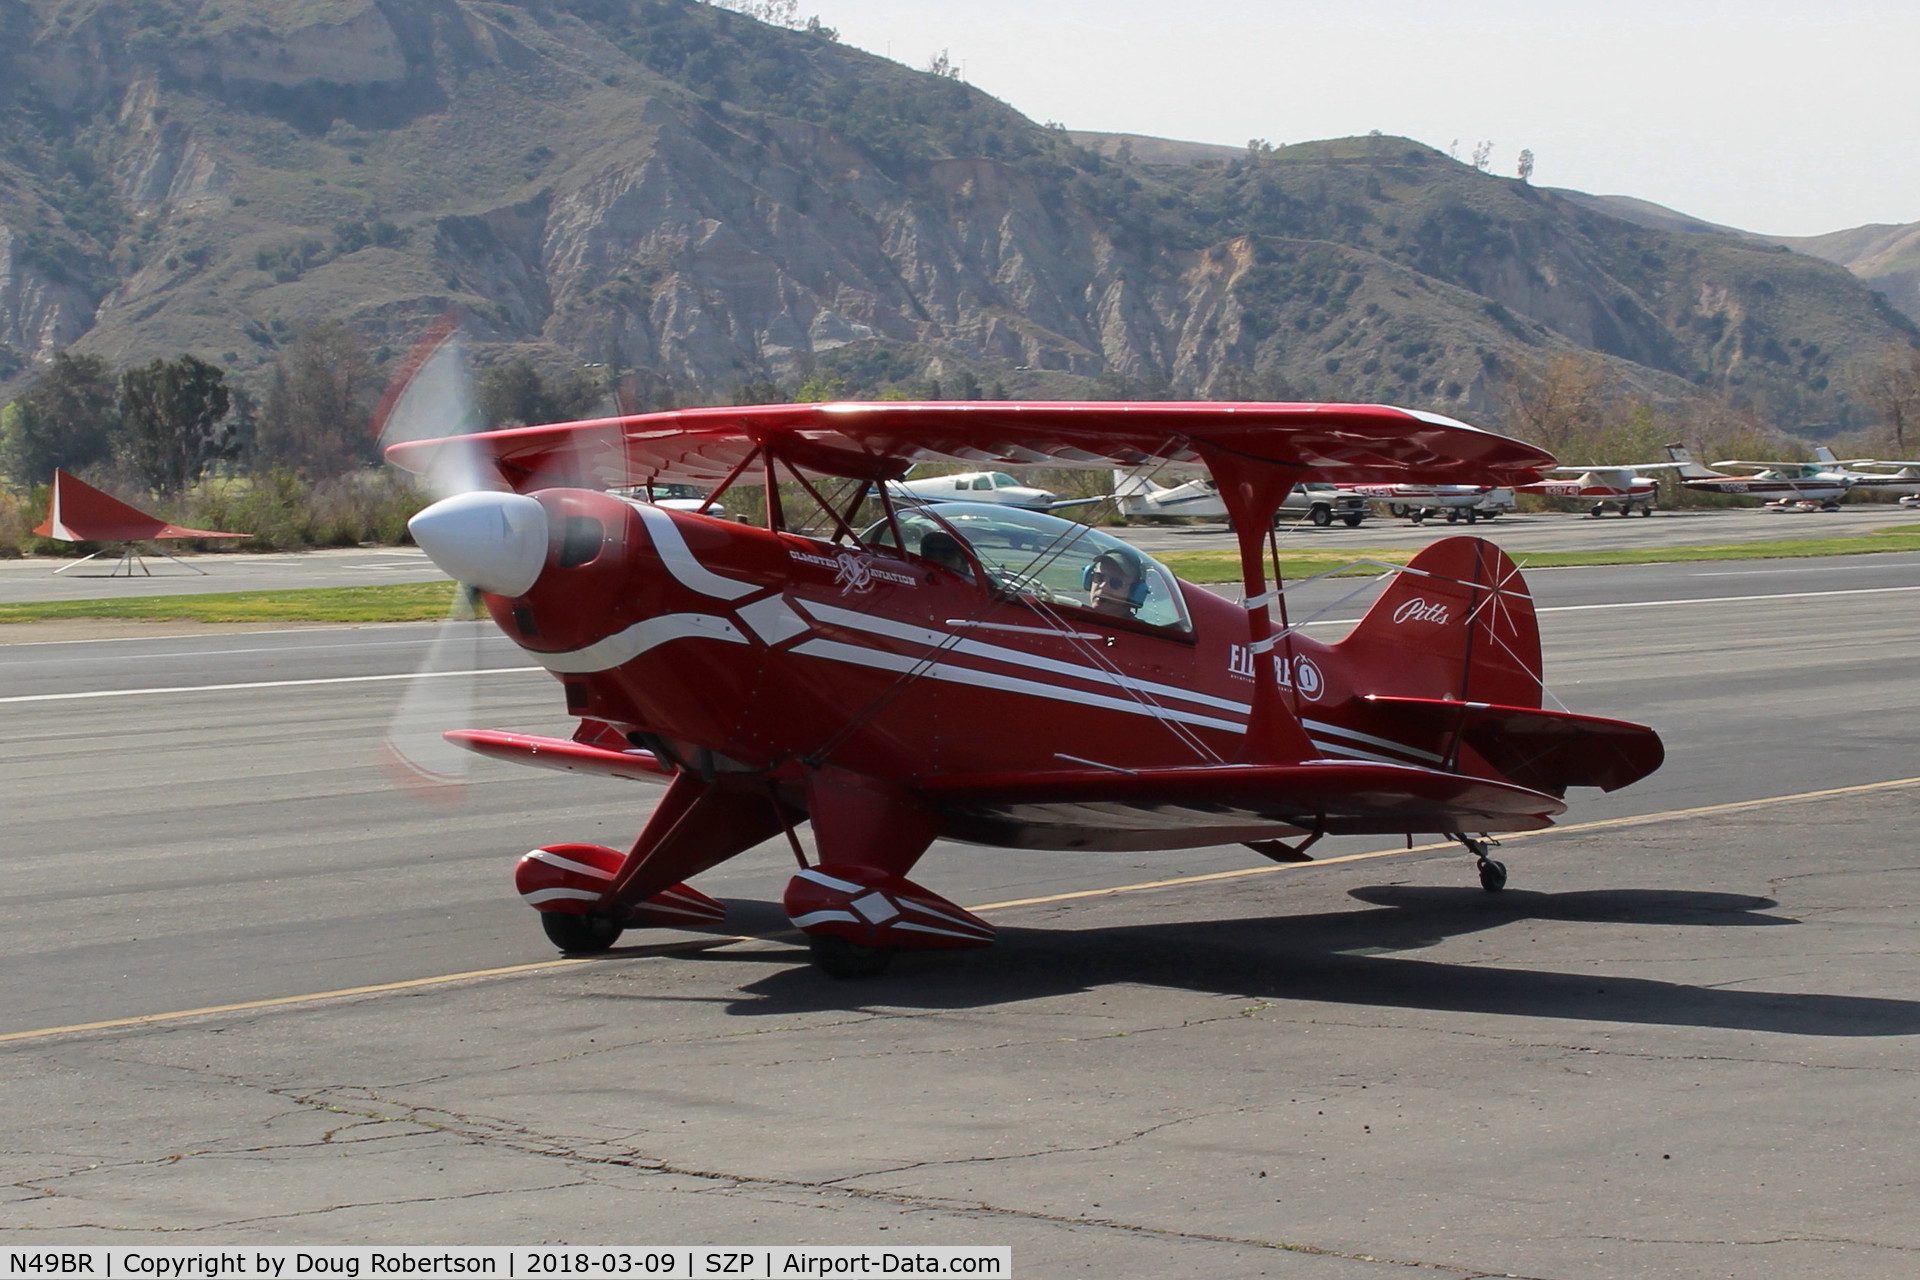 N49BR, Pitts S-2A Special C/N 2212, 1983 Aerotek PITTS S-2A SPECIAL, Lycoming AEIO-360 180 Hp, S-turns taxi to Rwy 22